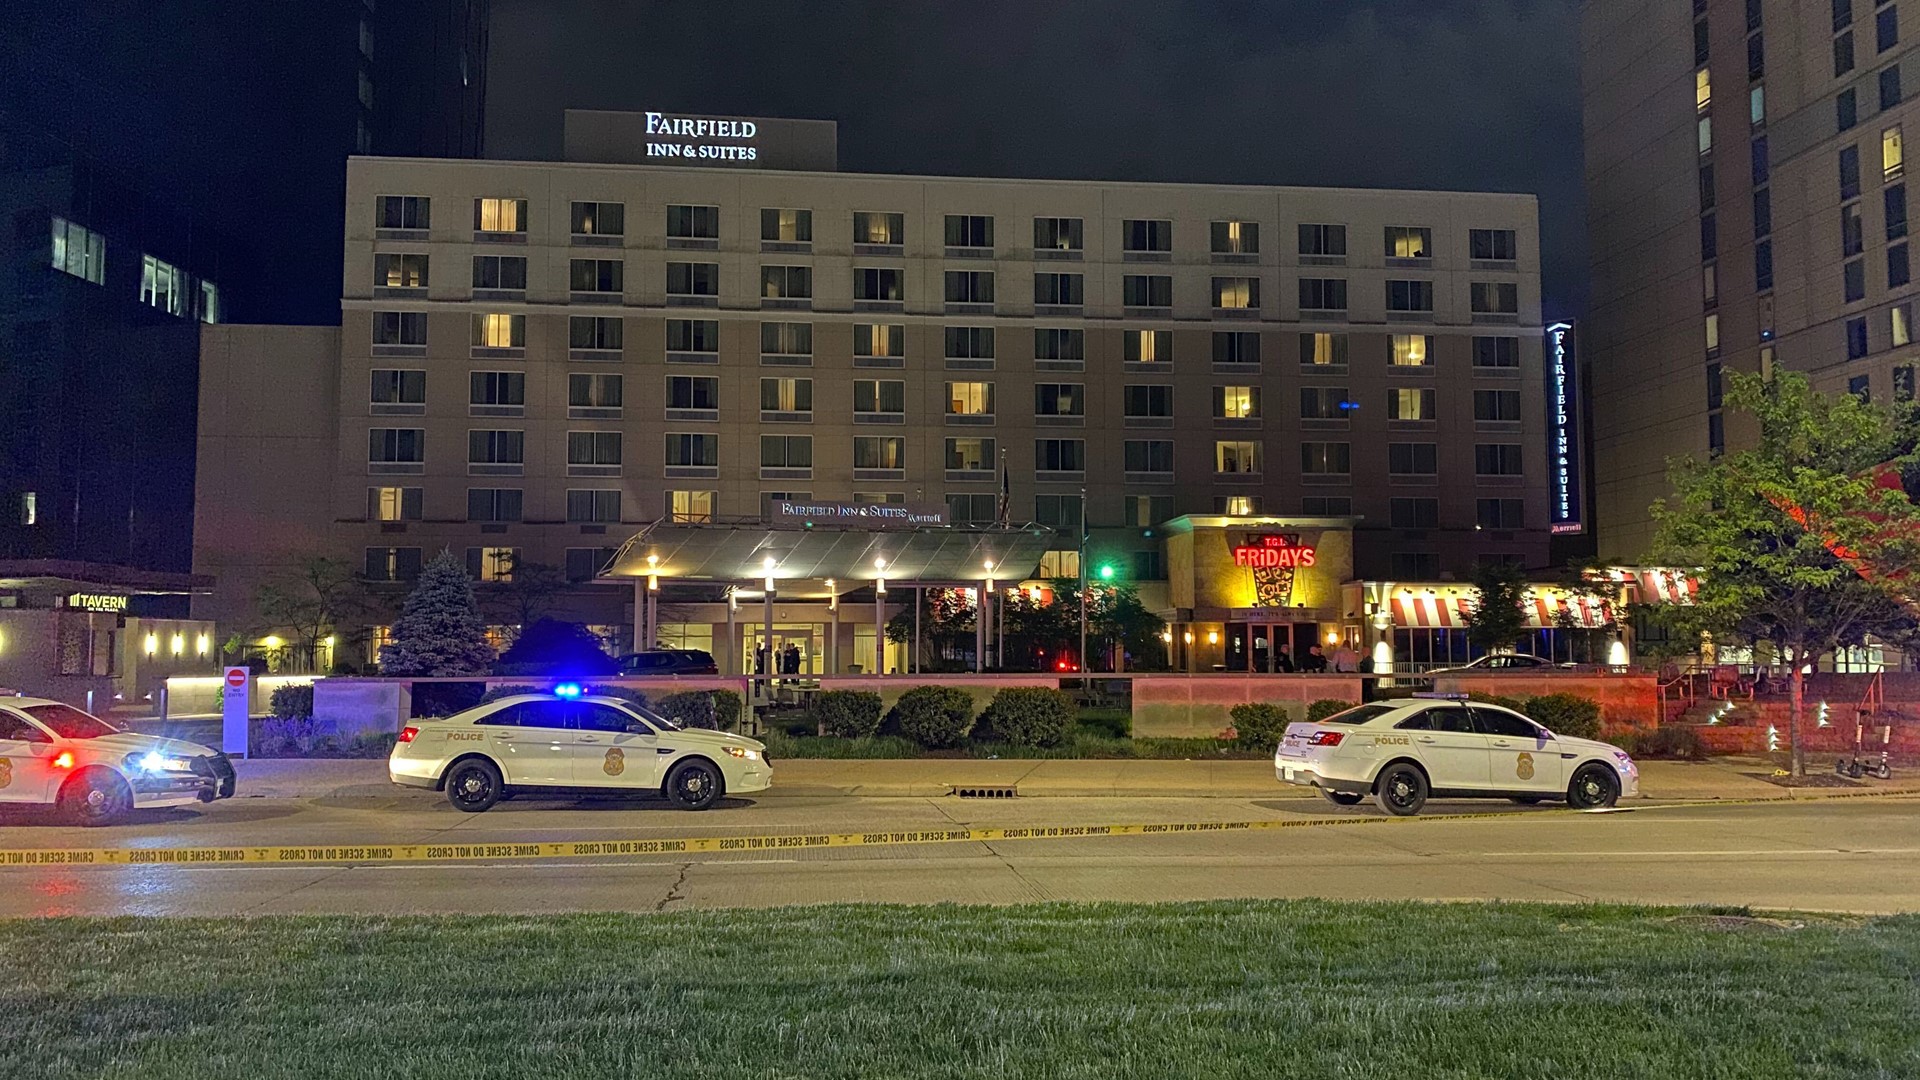 Police say three people, not four, were shot at a downtown Indianapolis hotel overnight. Two men died.